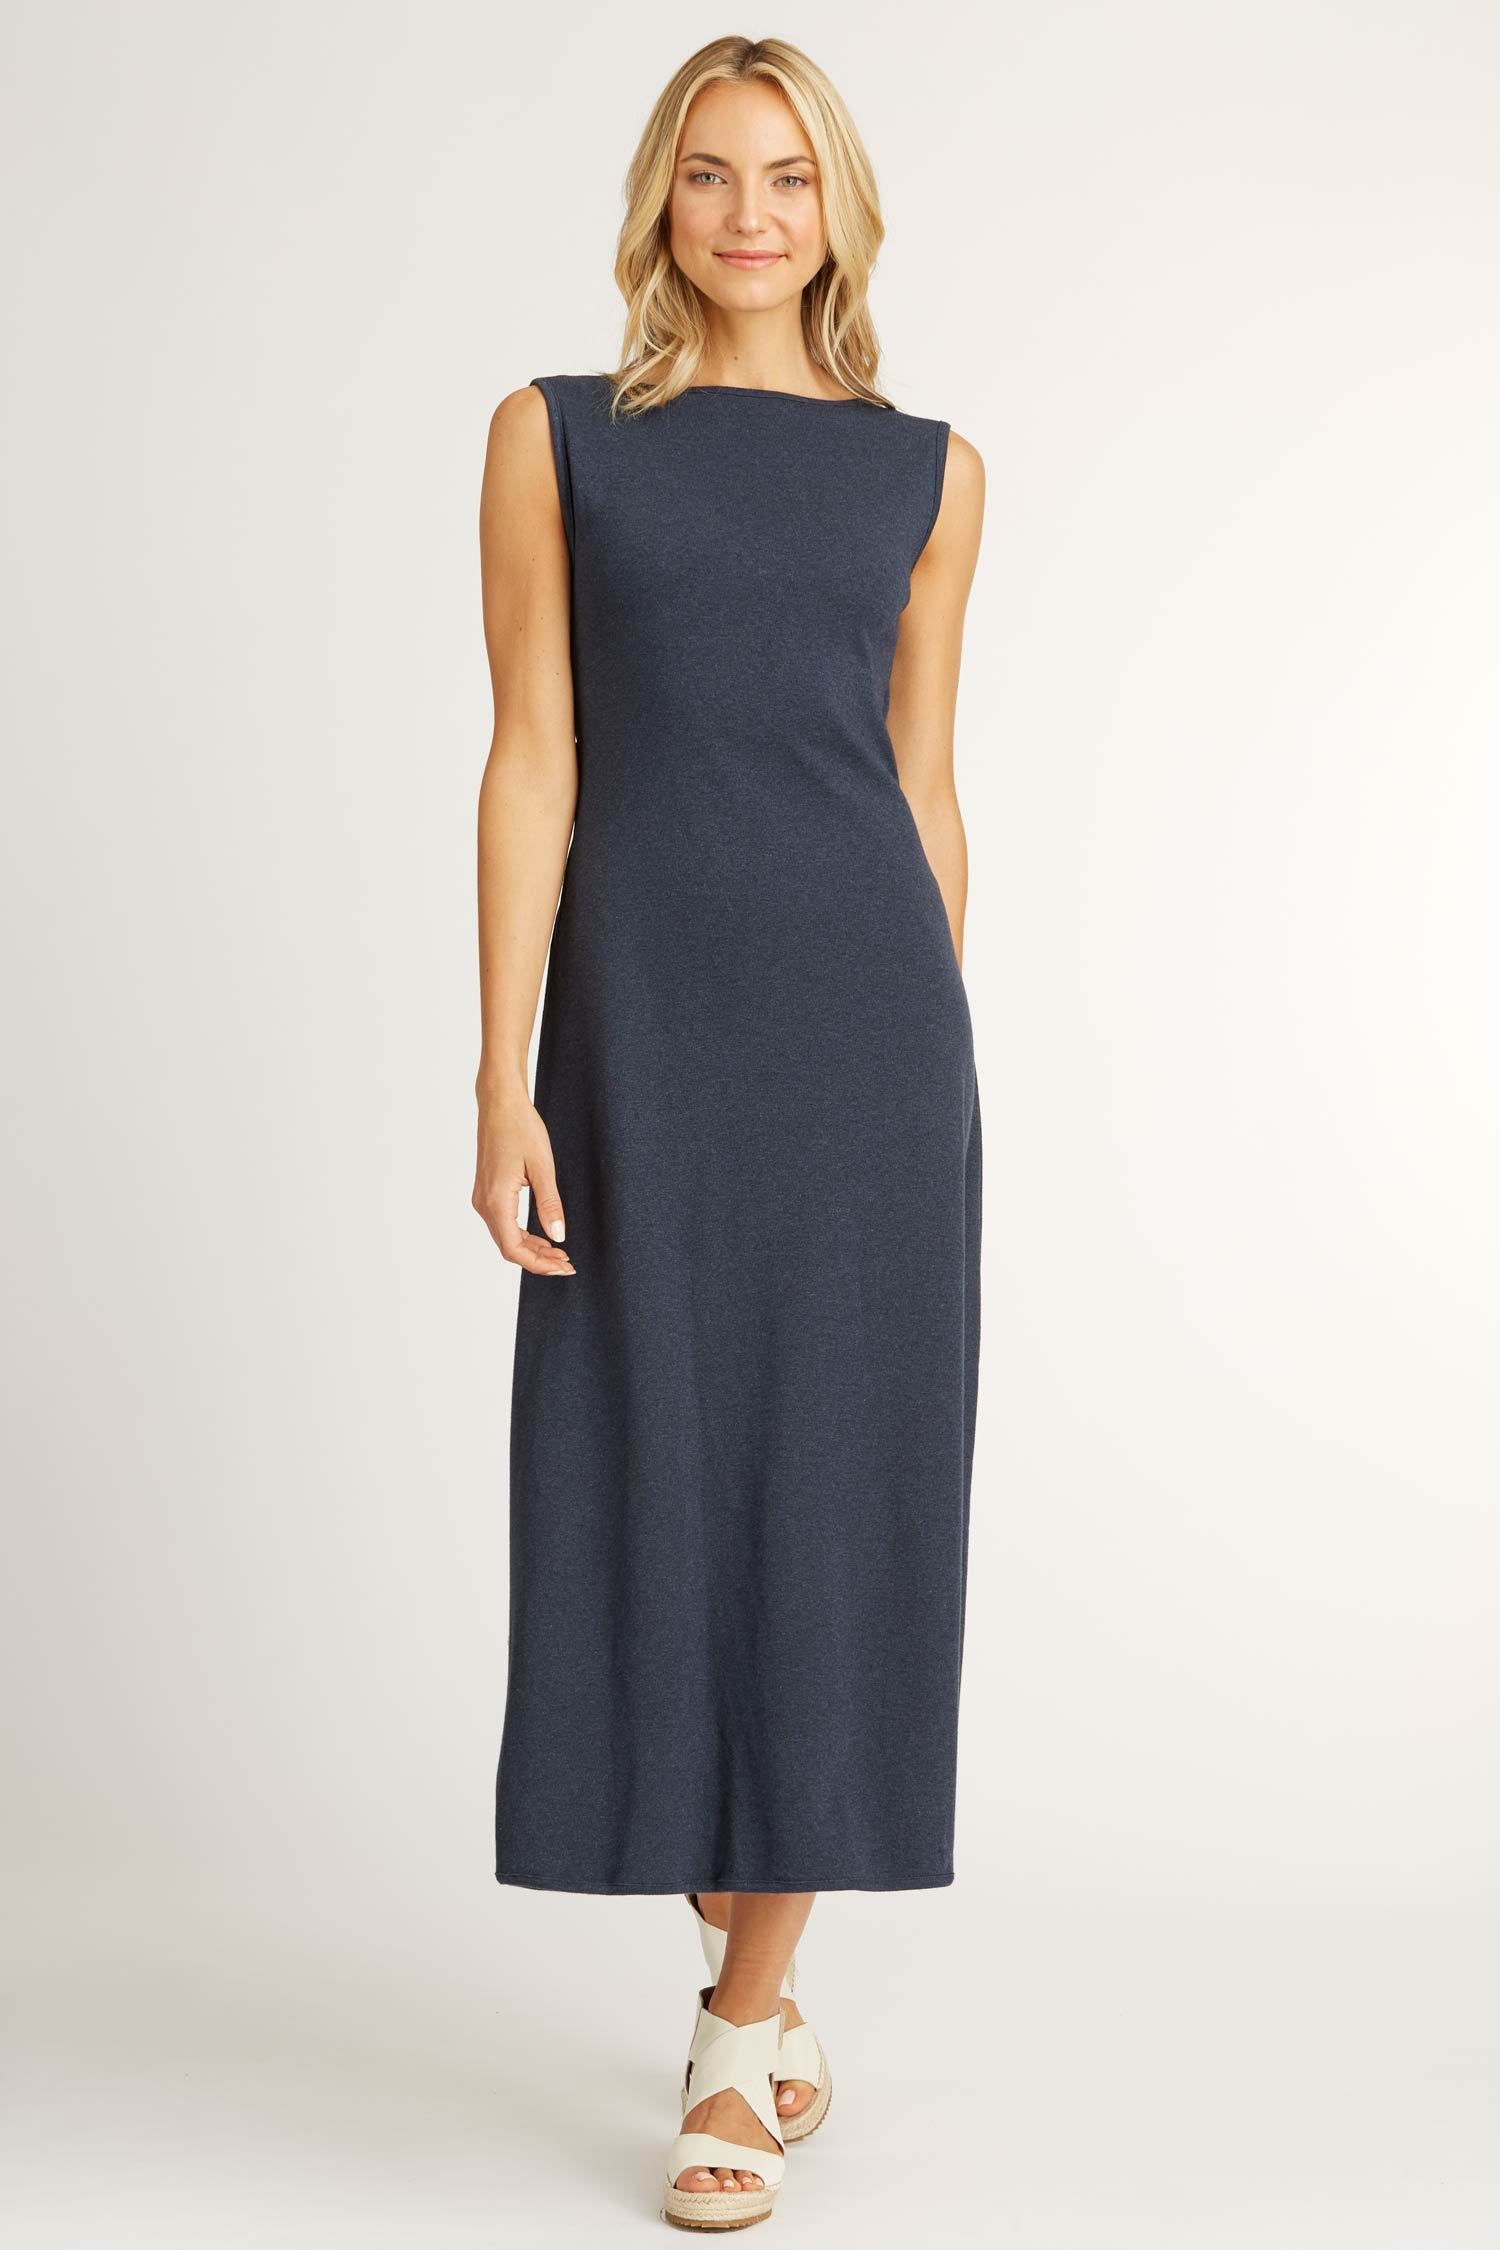 Womens Boatneck Maxi Dress in Navy Blue | Organic Cotton Clothing